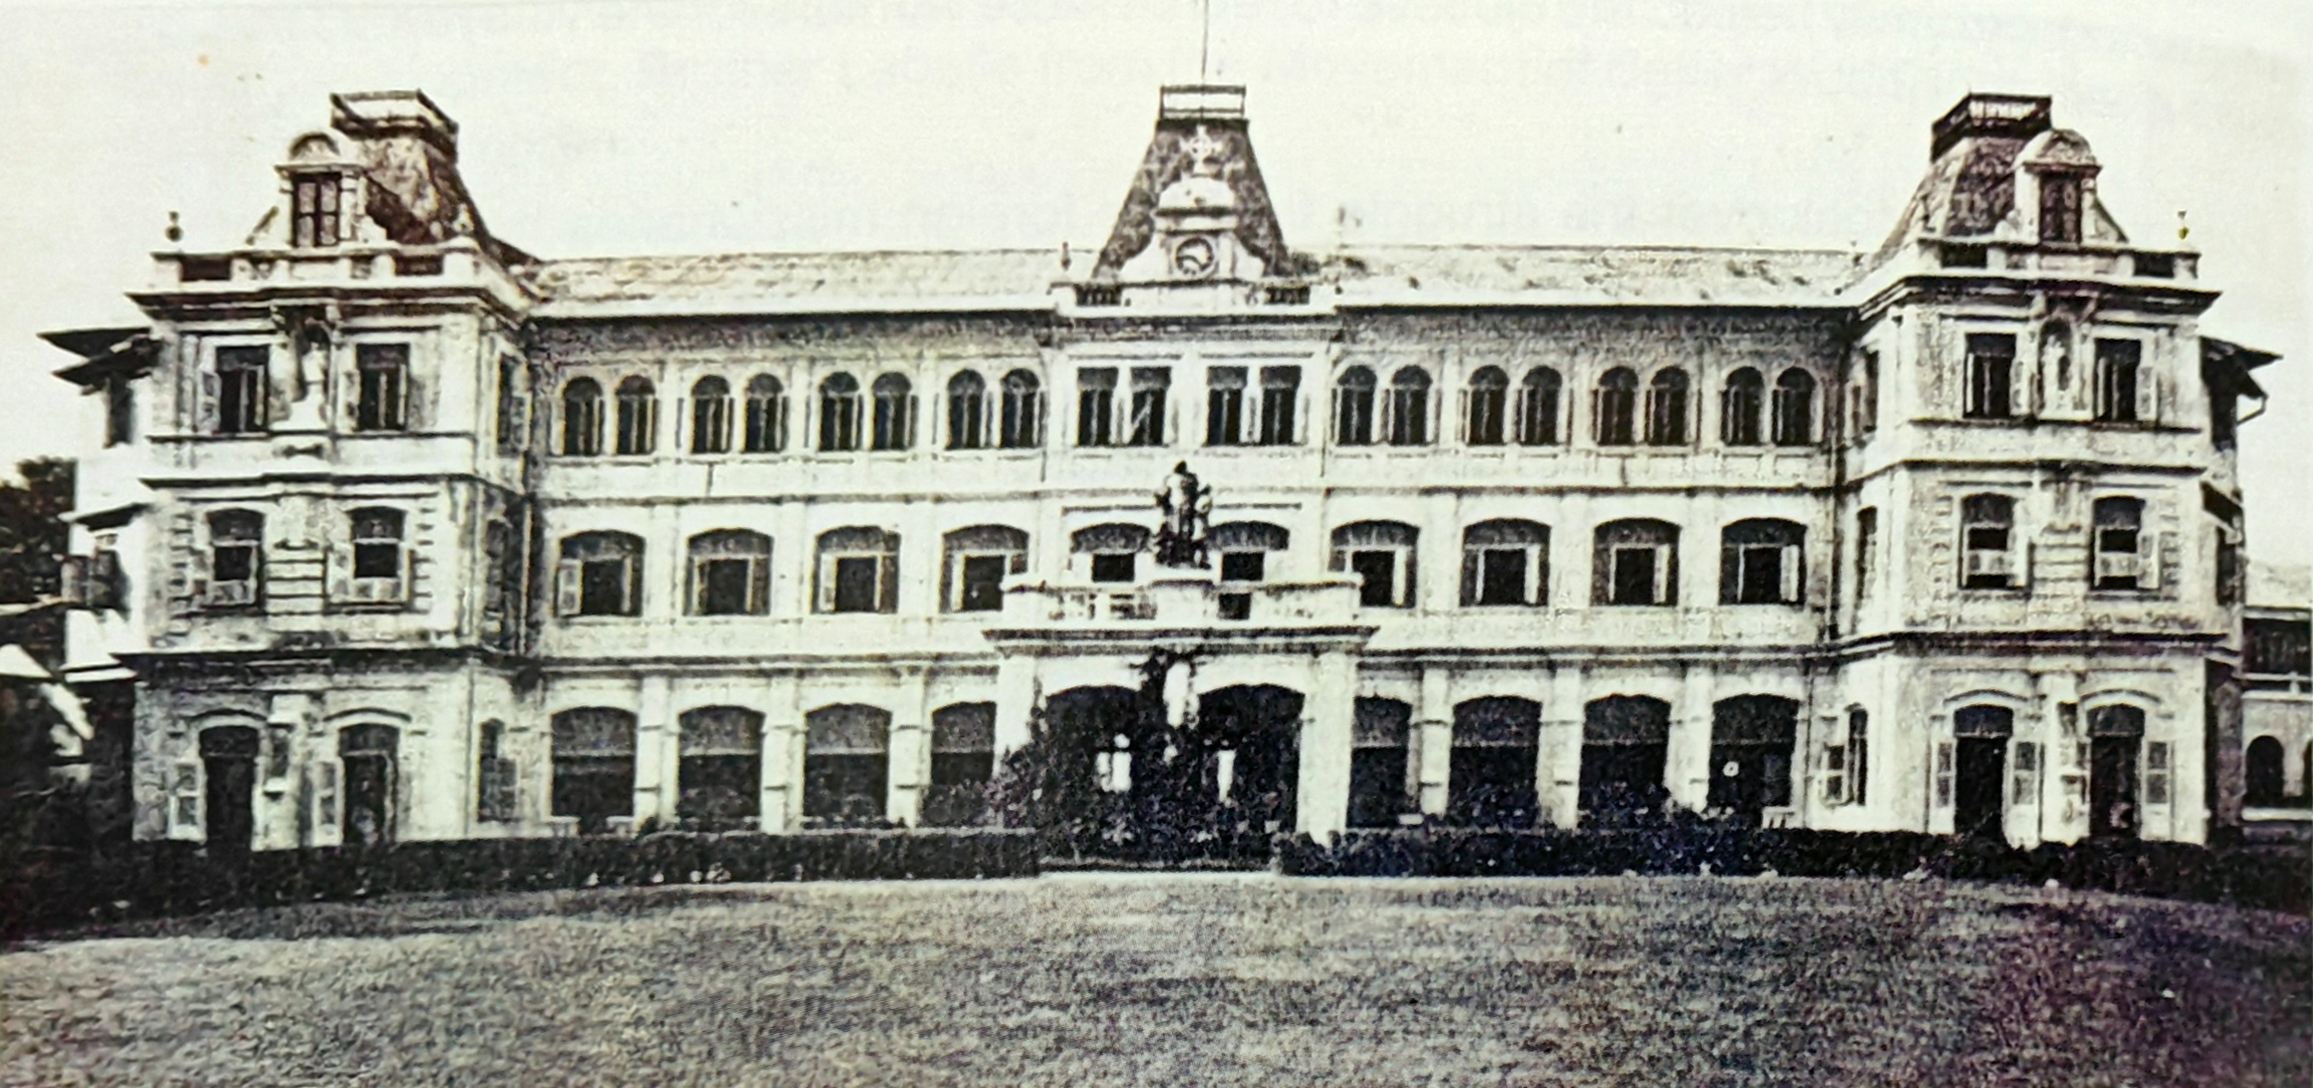 Fig 5 - St. Xavier's Institution - The first Christian Brothers School